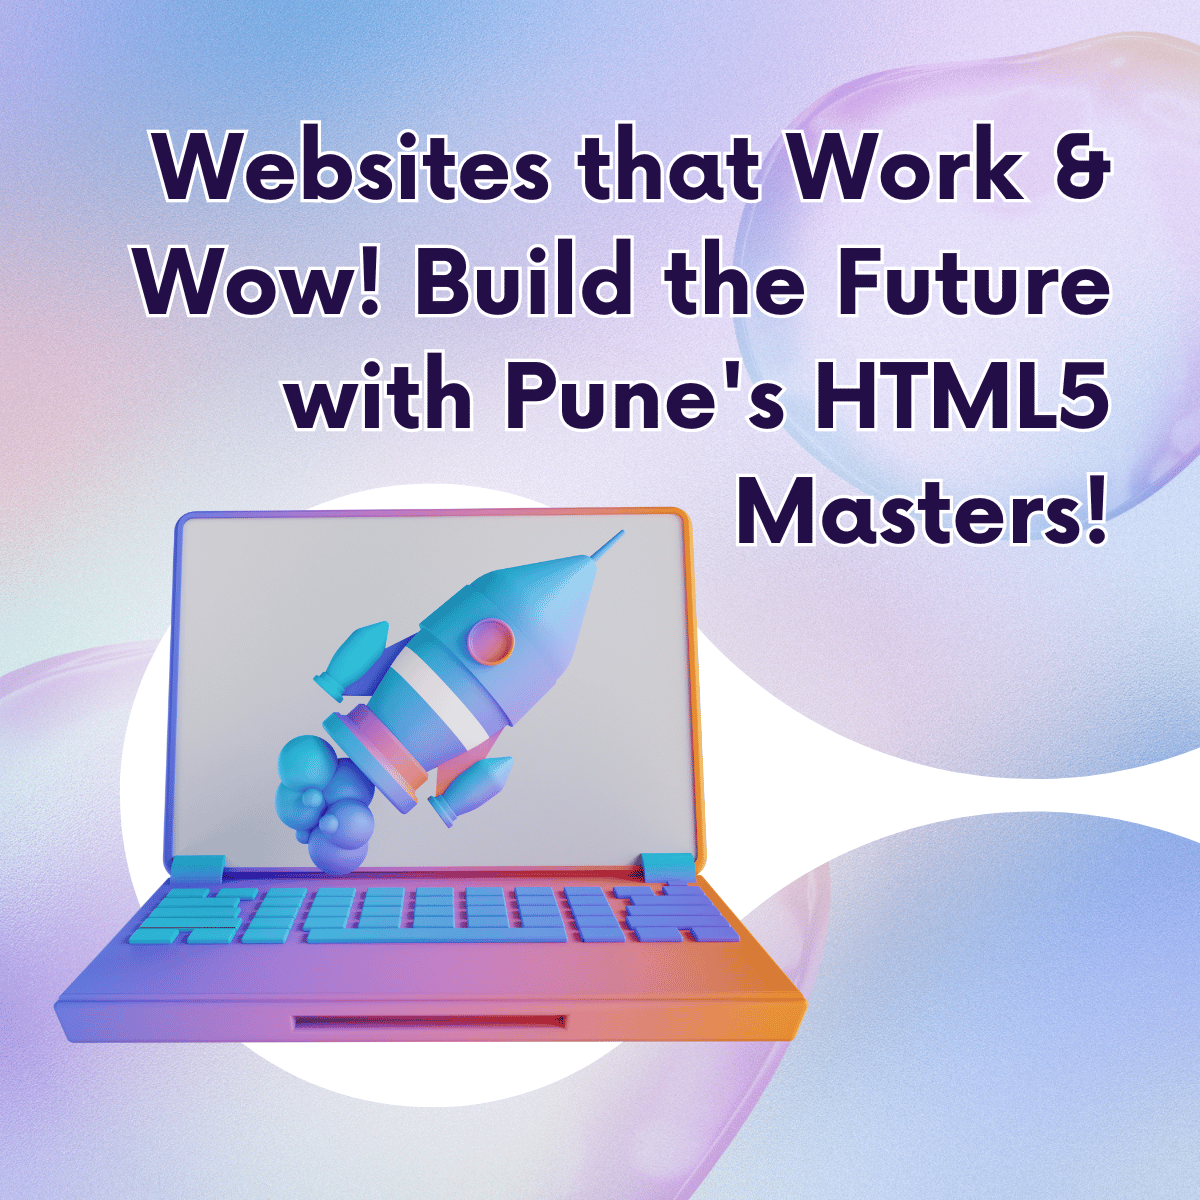 Websites that Work & Wow! Build the Future with Pune's HTML5 Masters!